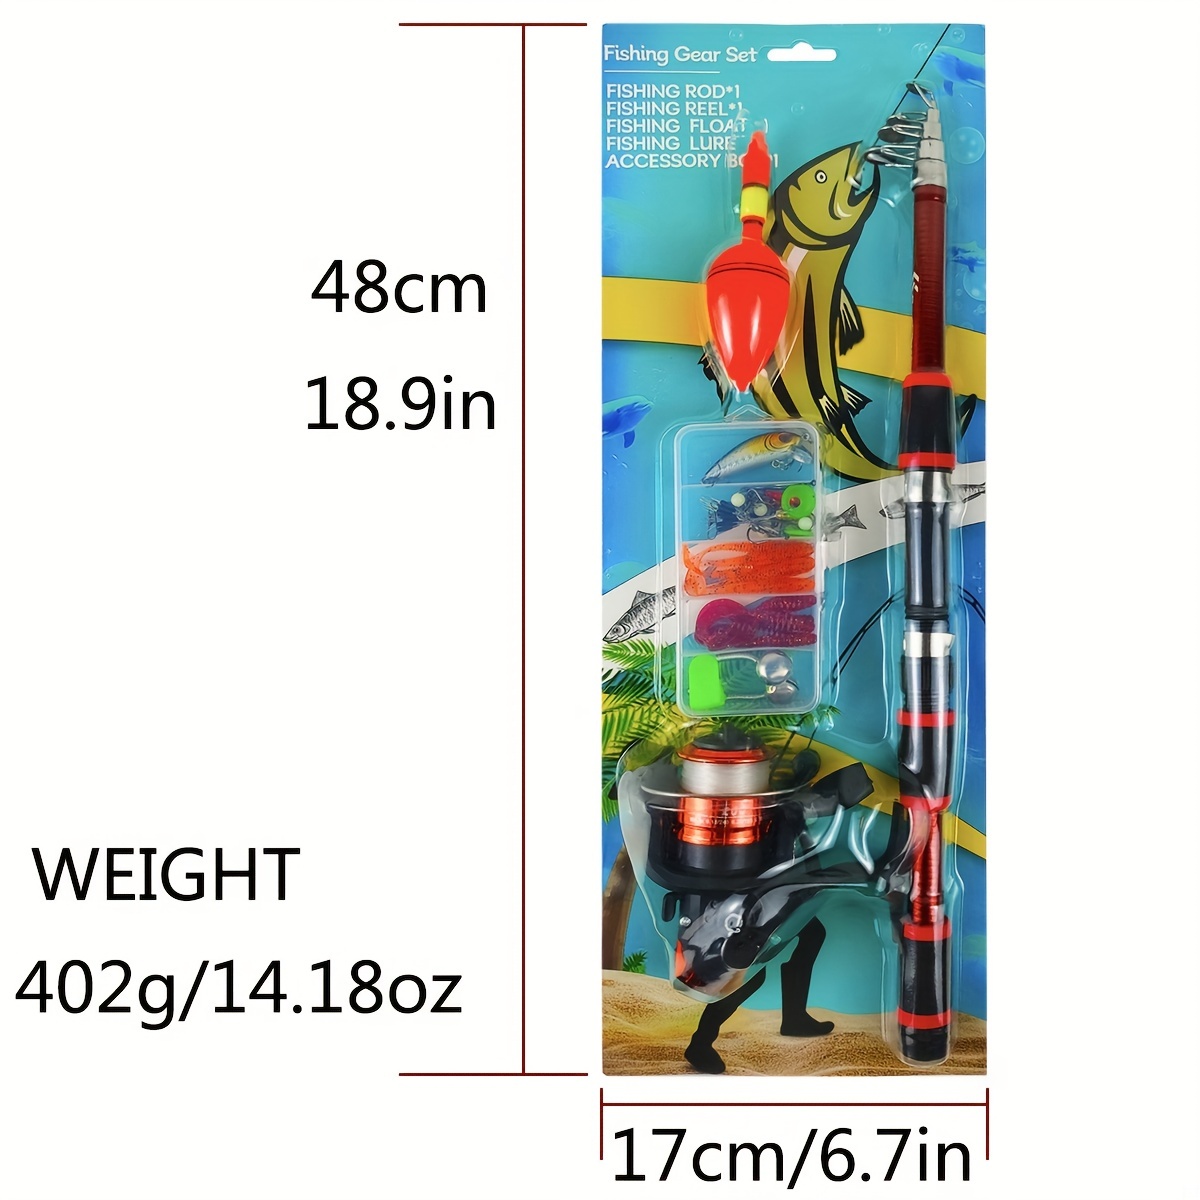 Spinning Fishing Rod and Reel Combo1.8M Telescopic Rod with 5.2:1 3BB  Fishign Reel Max Drag 5kg Fishing Kit